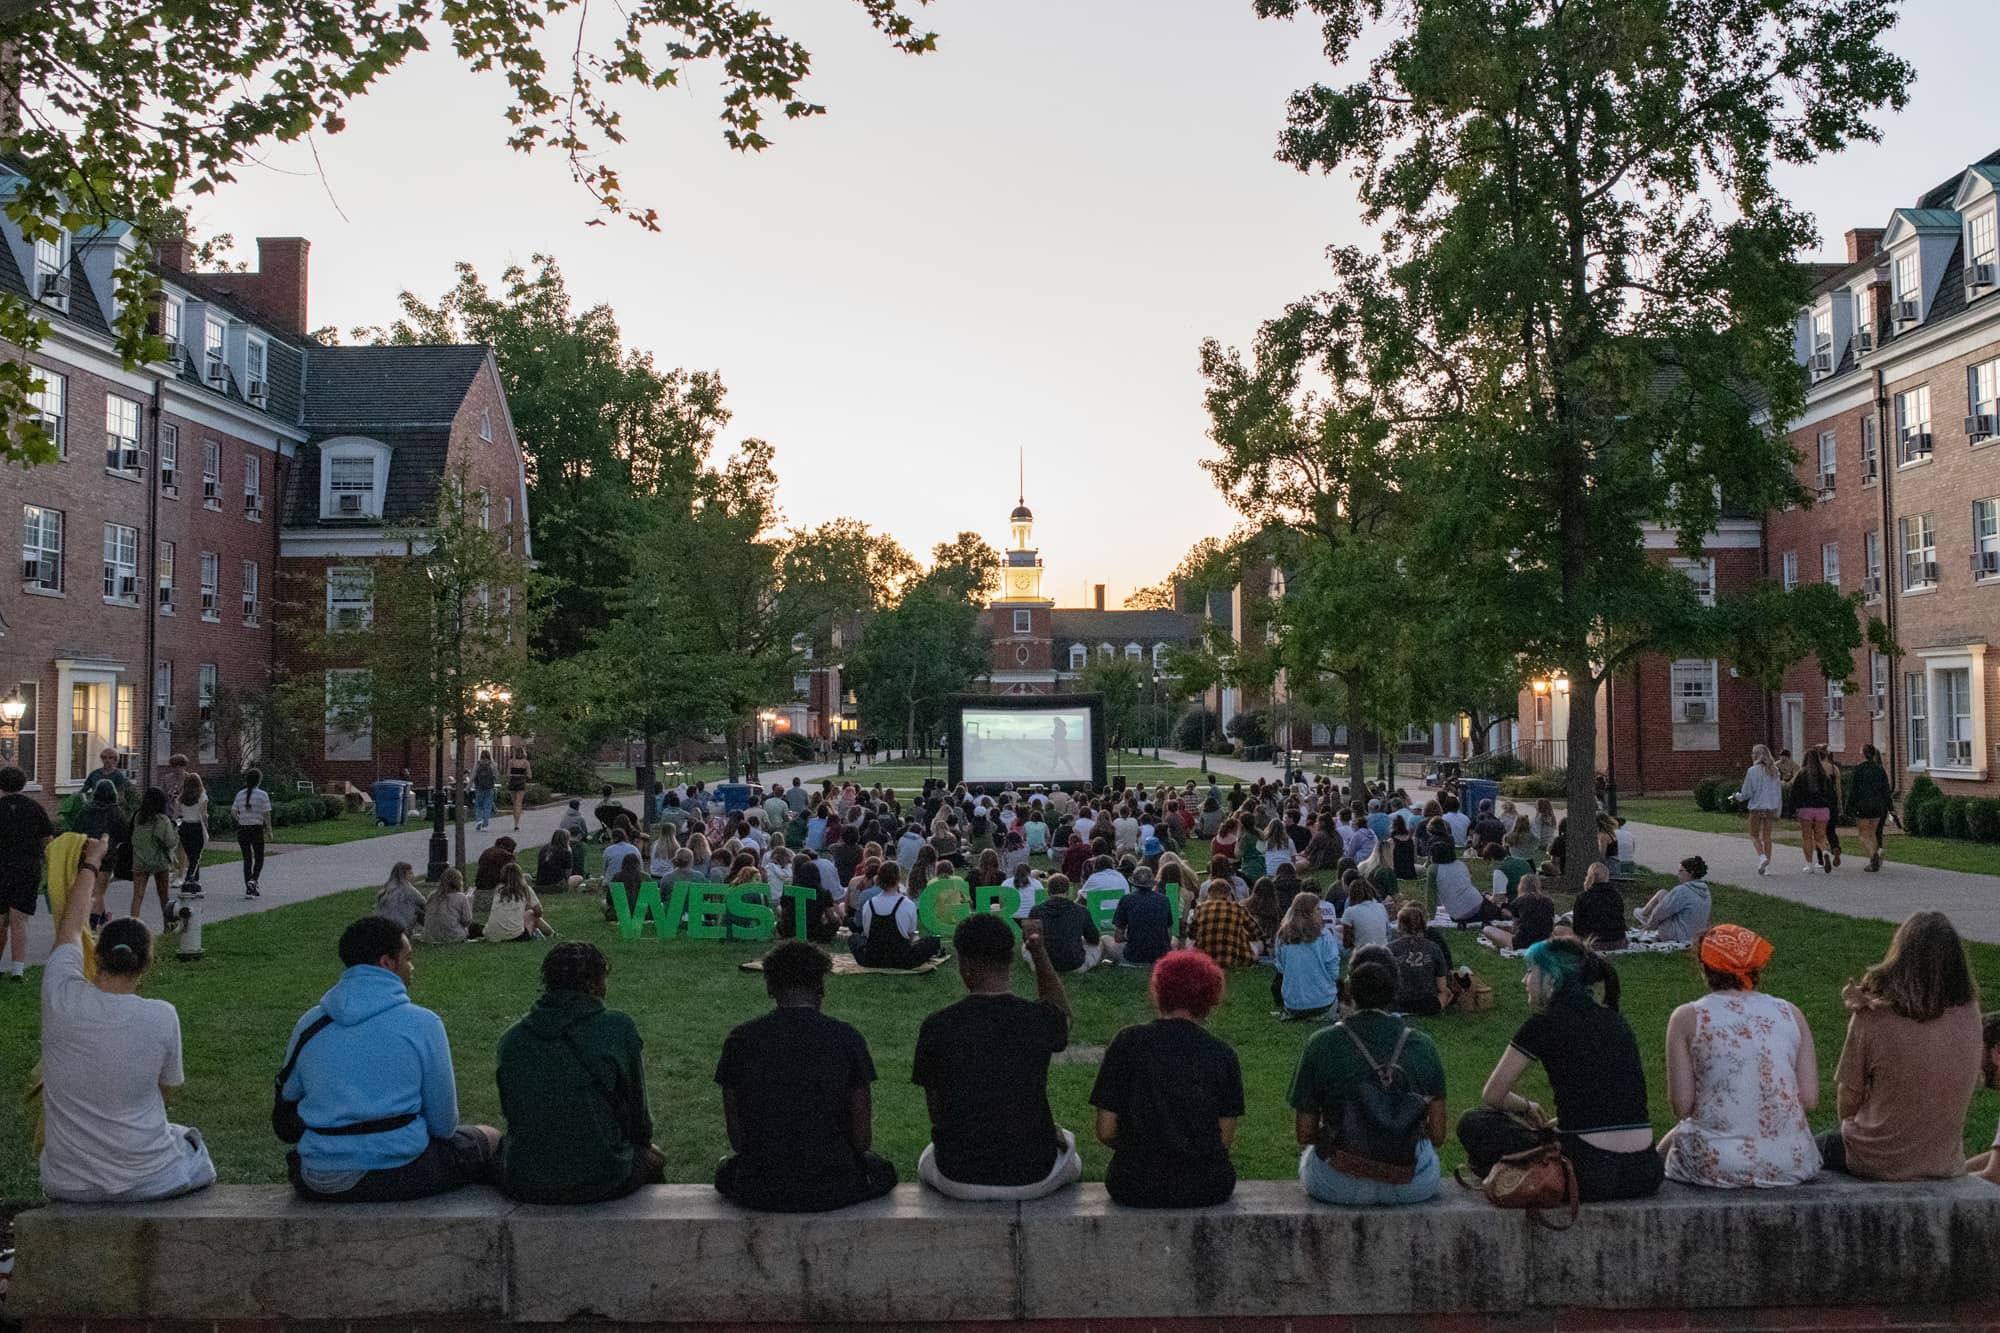 Students enjoy Movie Night/Games on West Green